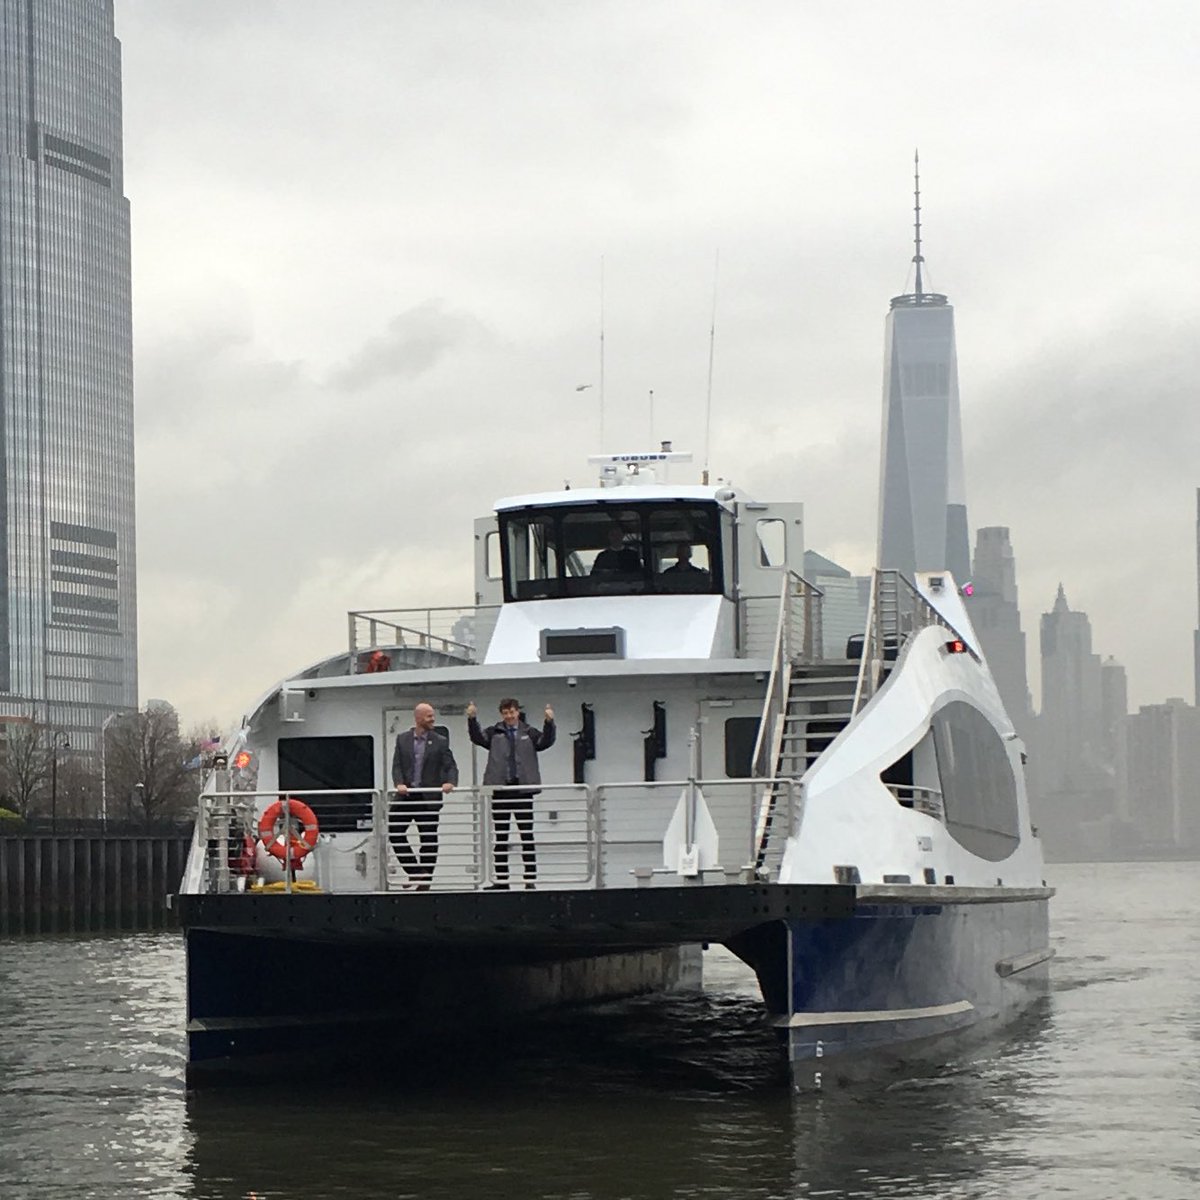 At Liberty Landing with @jbpatchett testing 1st new @CitywideFerry boat. One down, 19 to go! @NYCEDC @NYCMayorsOffice